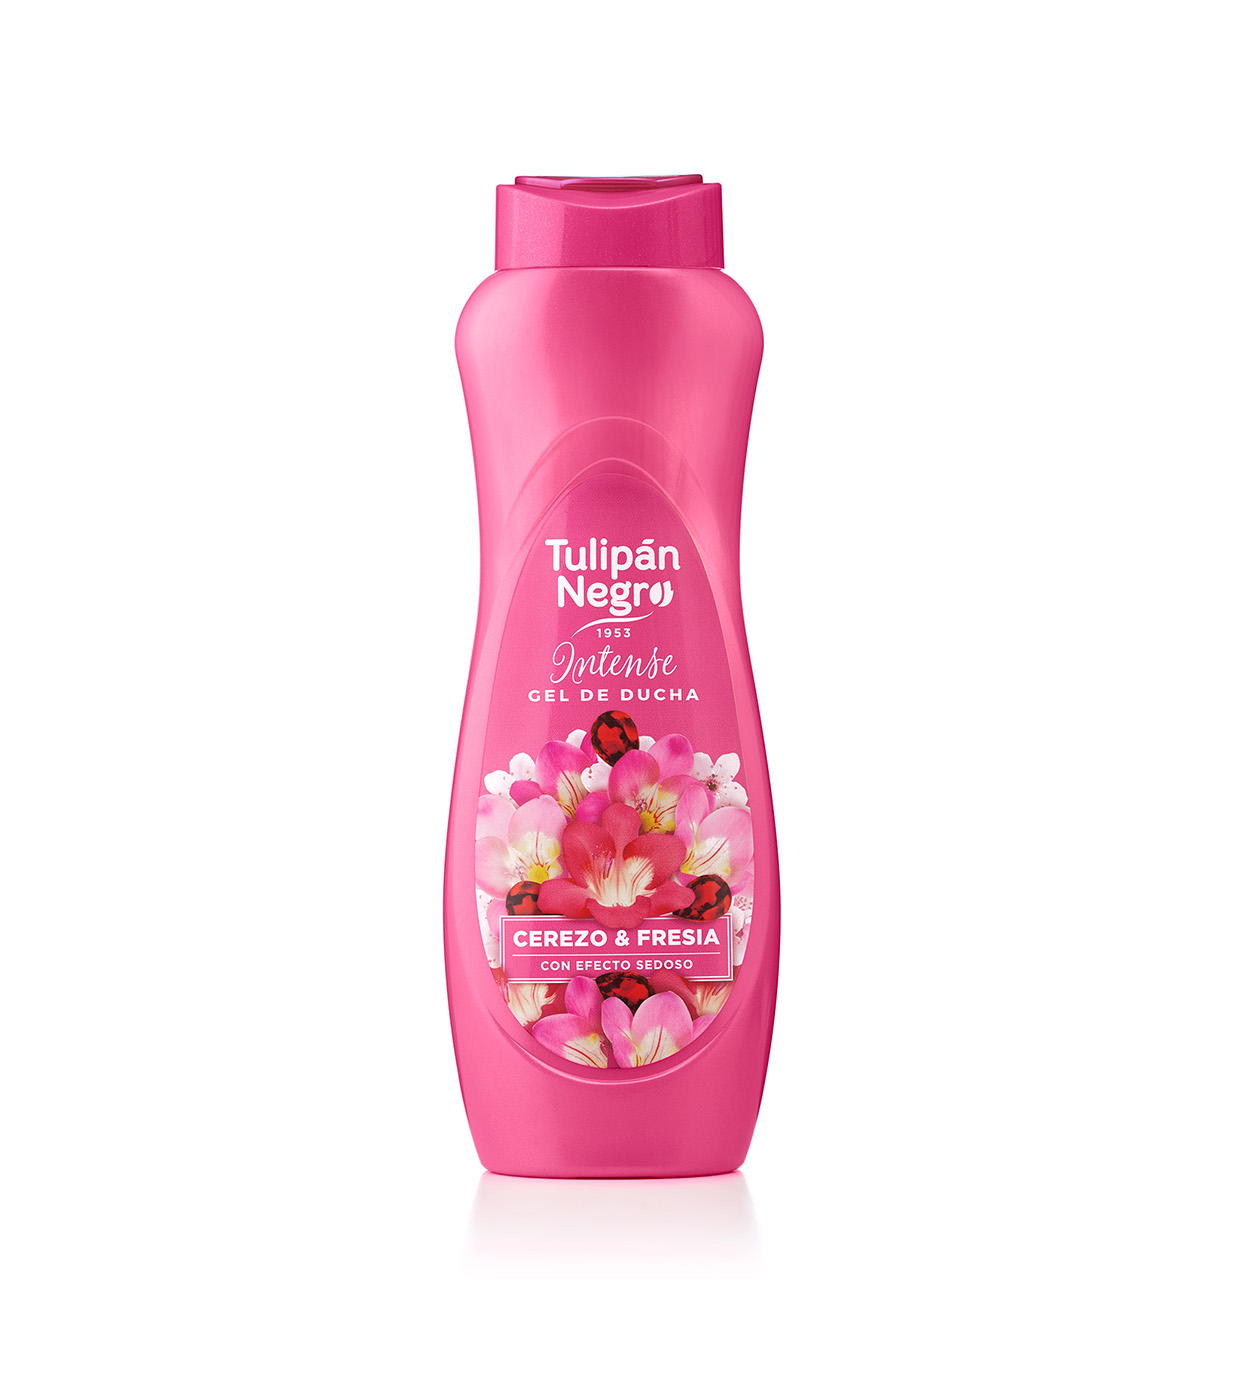 Buy Tulipán Negro - Body Lotion - Shea Butter and Coconut Oil